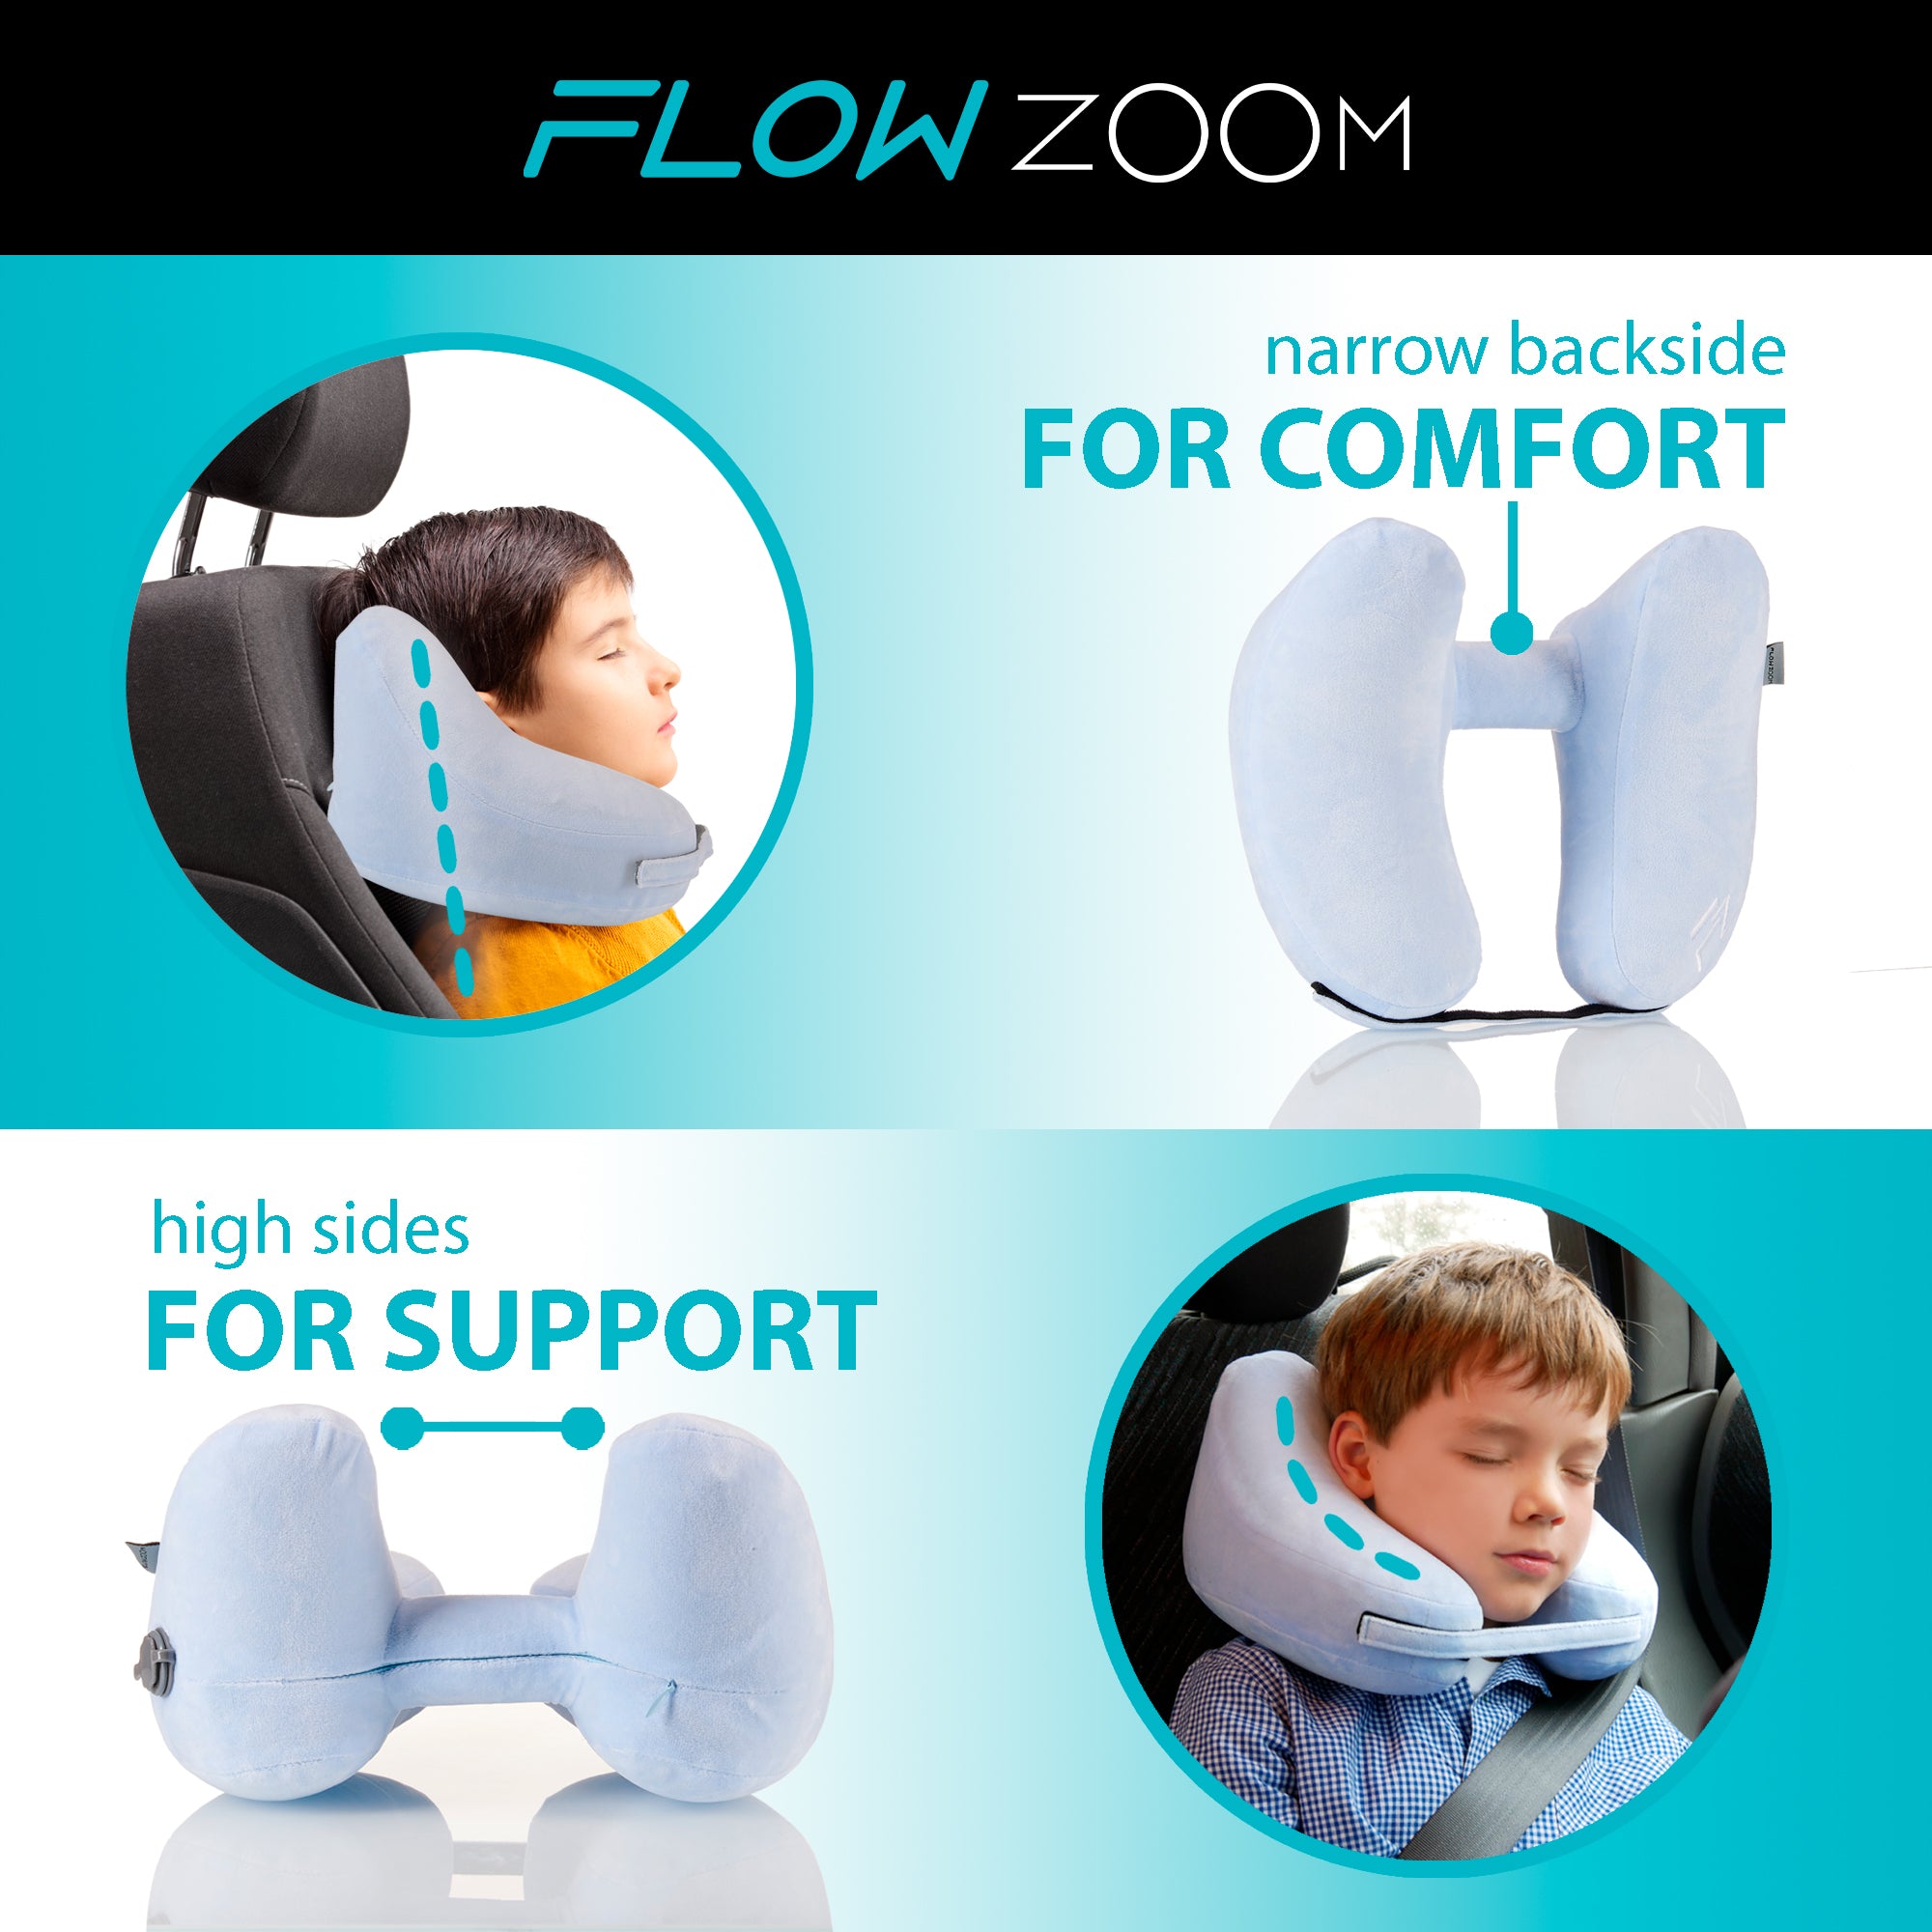 Kids' Travel Pillow  Seat to Sleep Review • Flying With Kids Tips